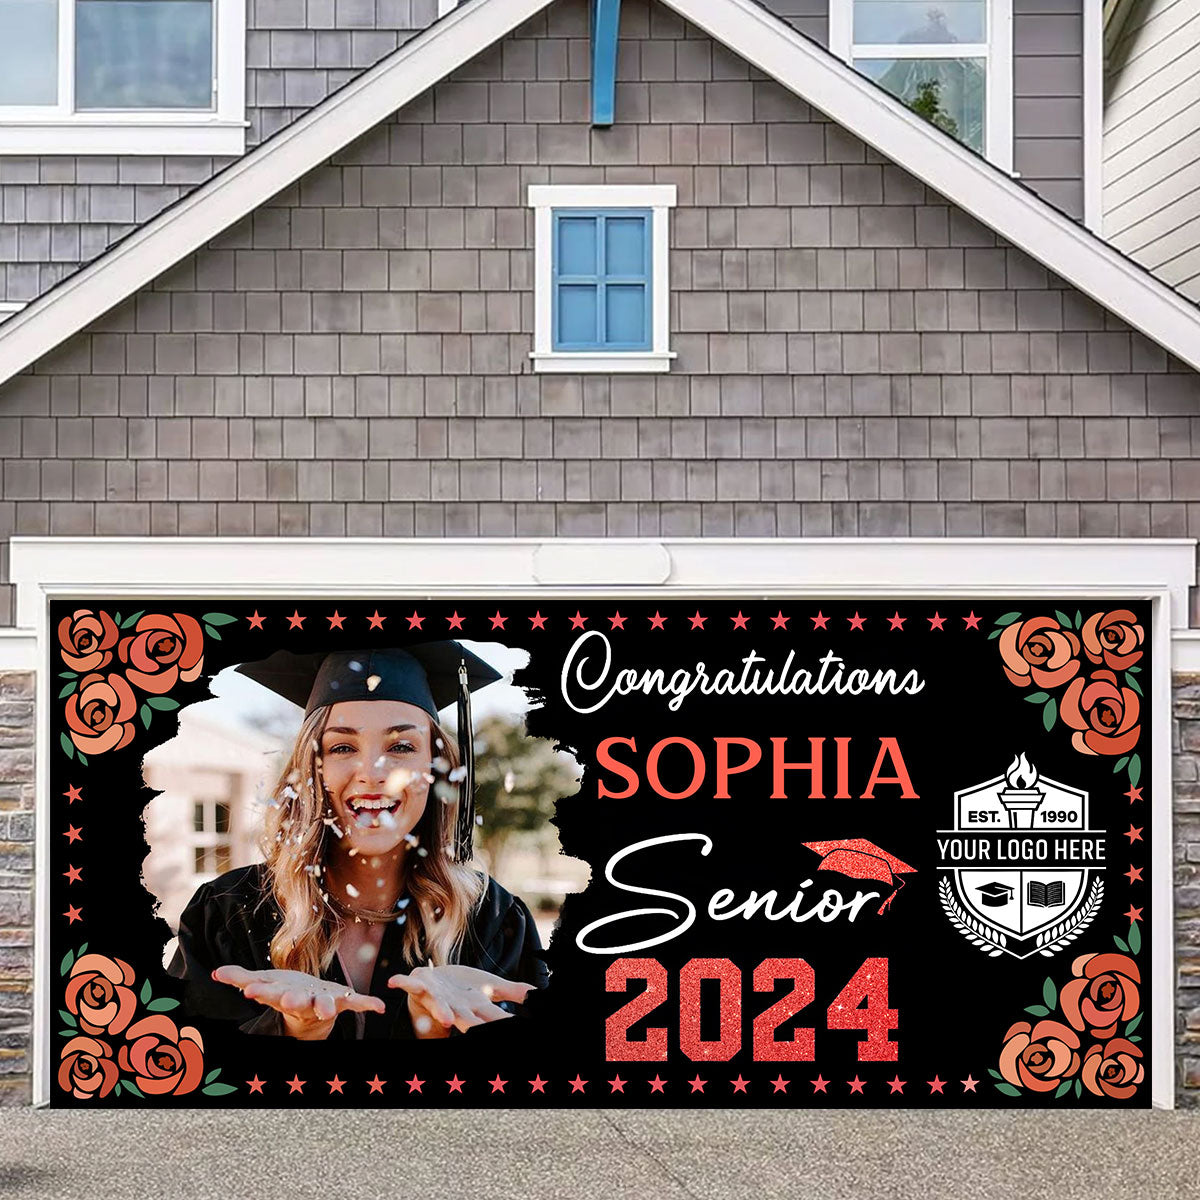 Congratulations Senior 2024 - Personalized Photo, Your Name And School Name Single Garage, Garage Door Banner Covers - Garage Door Banner Decorations